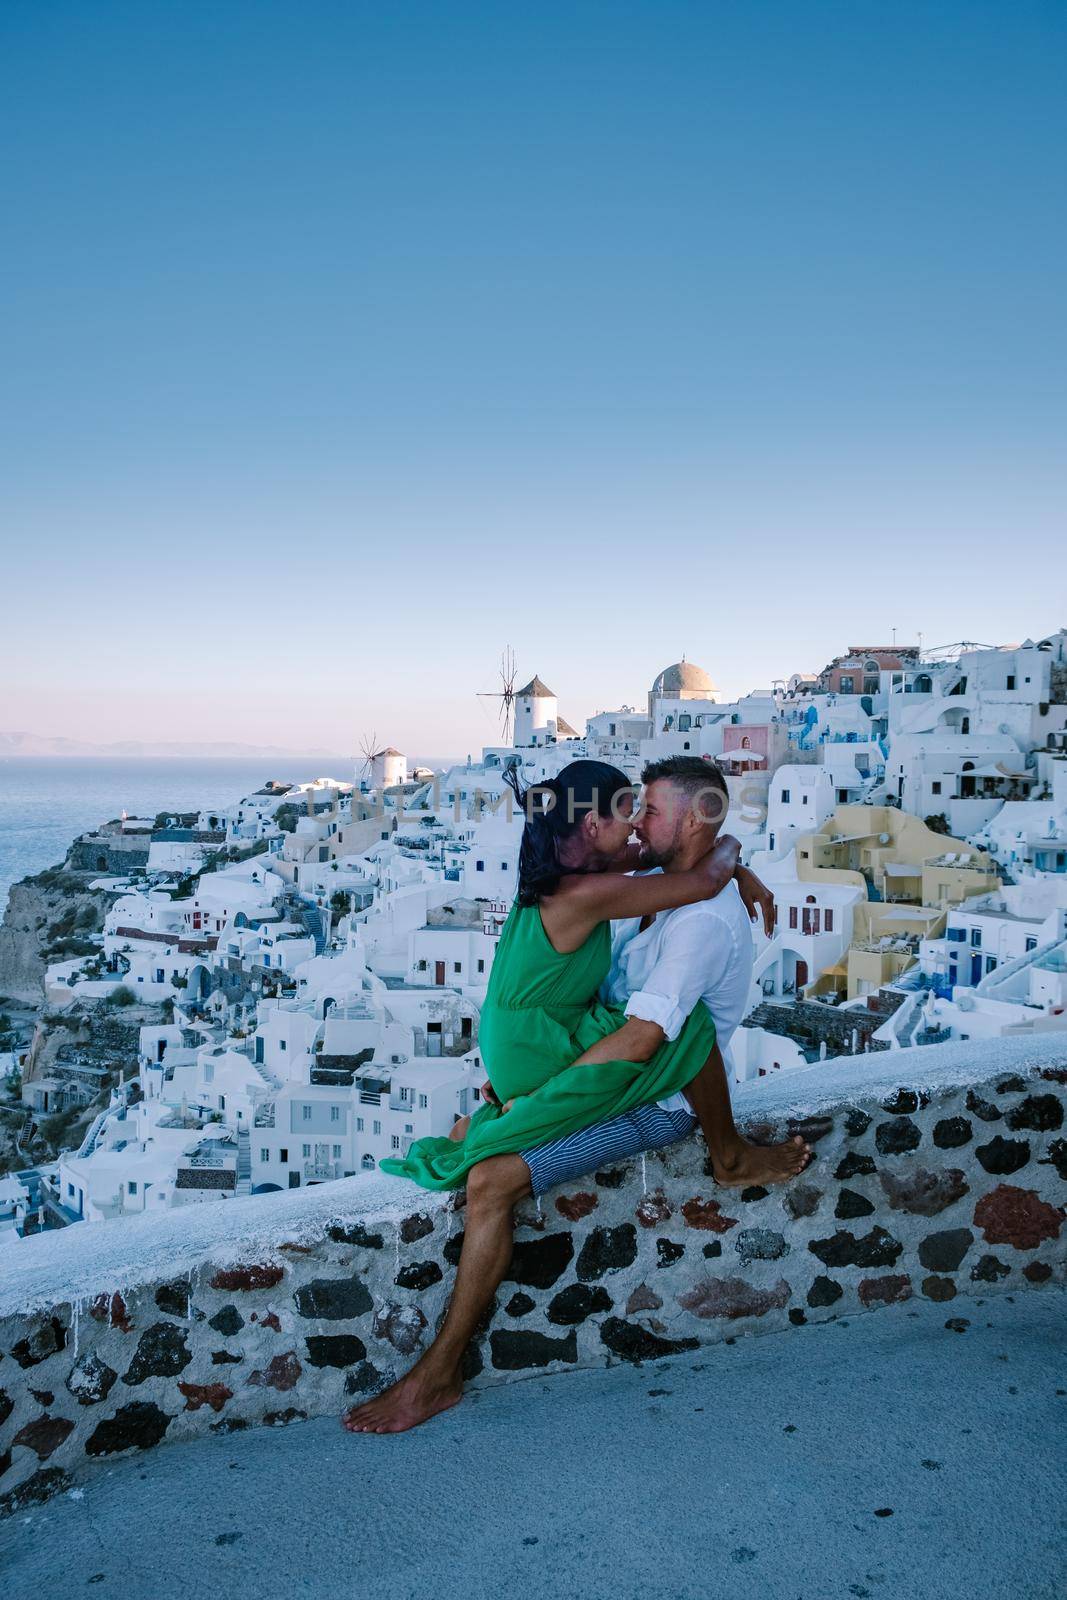 Santorini Greece, young couple on luxury vacation at the Island of Santorini watching sunrise by the blue dome church and whitewashed village of Oia Santorini Greece during sunrise during summer vacation, men and woman on holiday in Greece